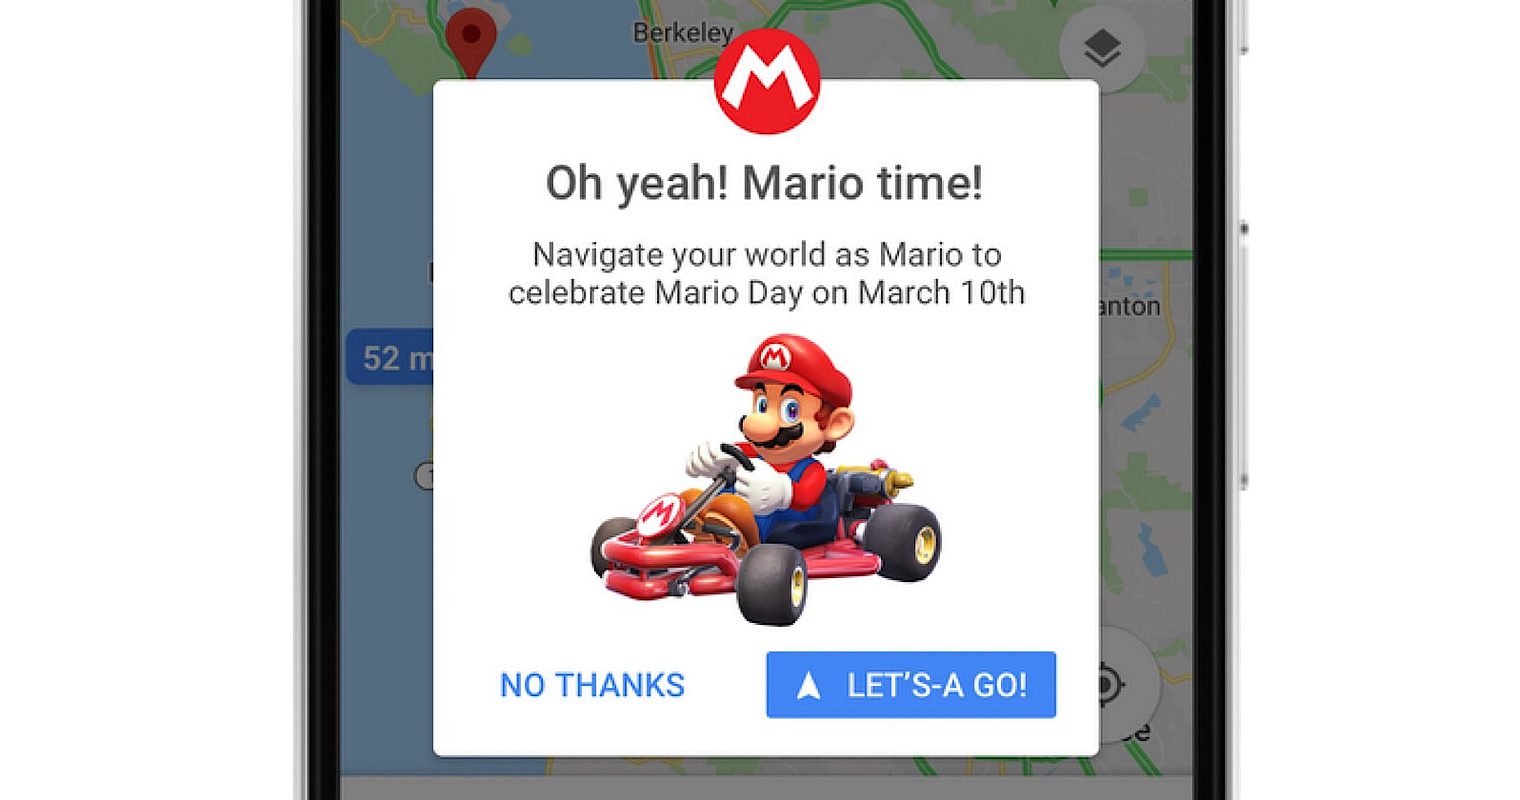 Starting on March 10, Navigate Google Maps with Mario for a Limited Time